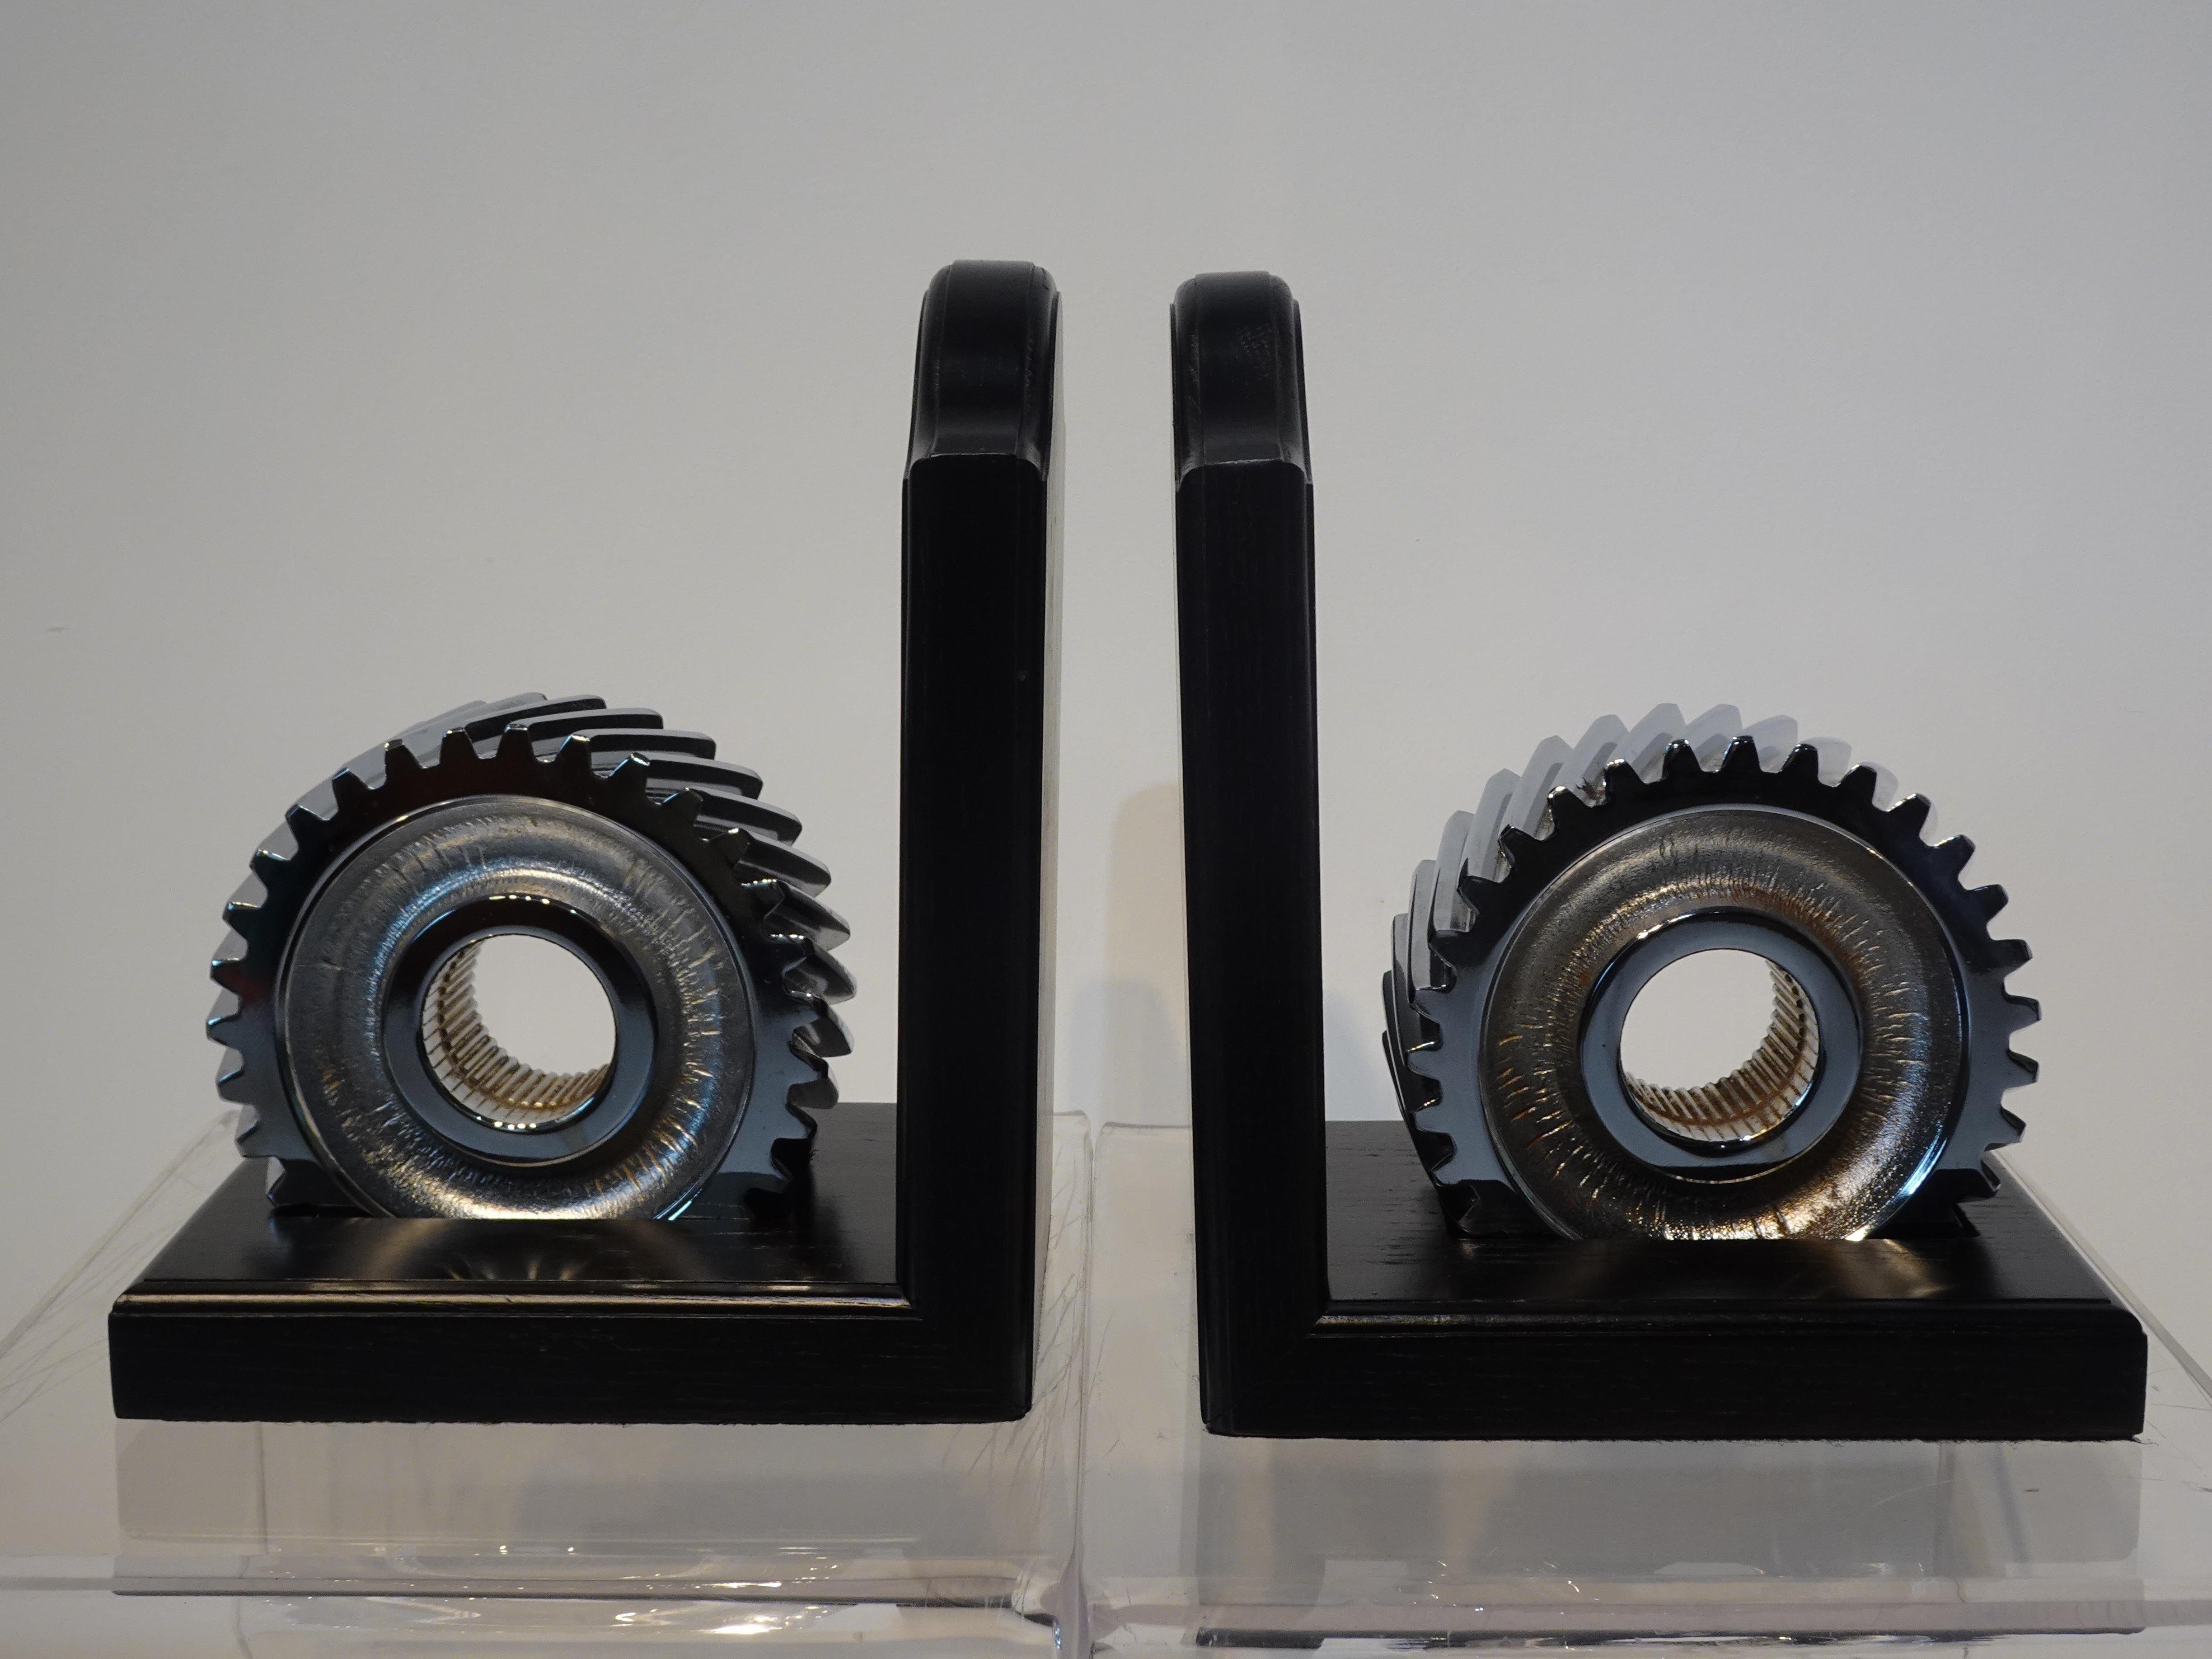 A pair of chrome plated industrial gear bookends free set into cut out slots in the base of the wooden holders which are finished in satin black. Very heavy and can hold many of the larger coffee table or weighty books on your shelve and desk,